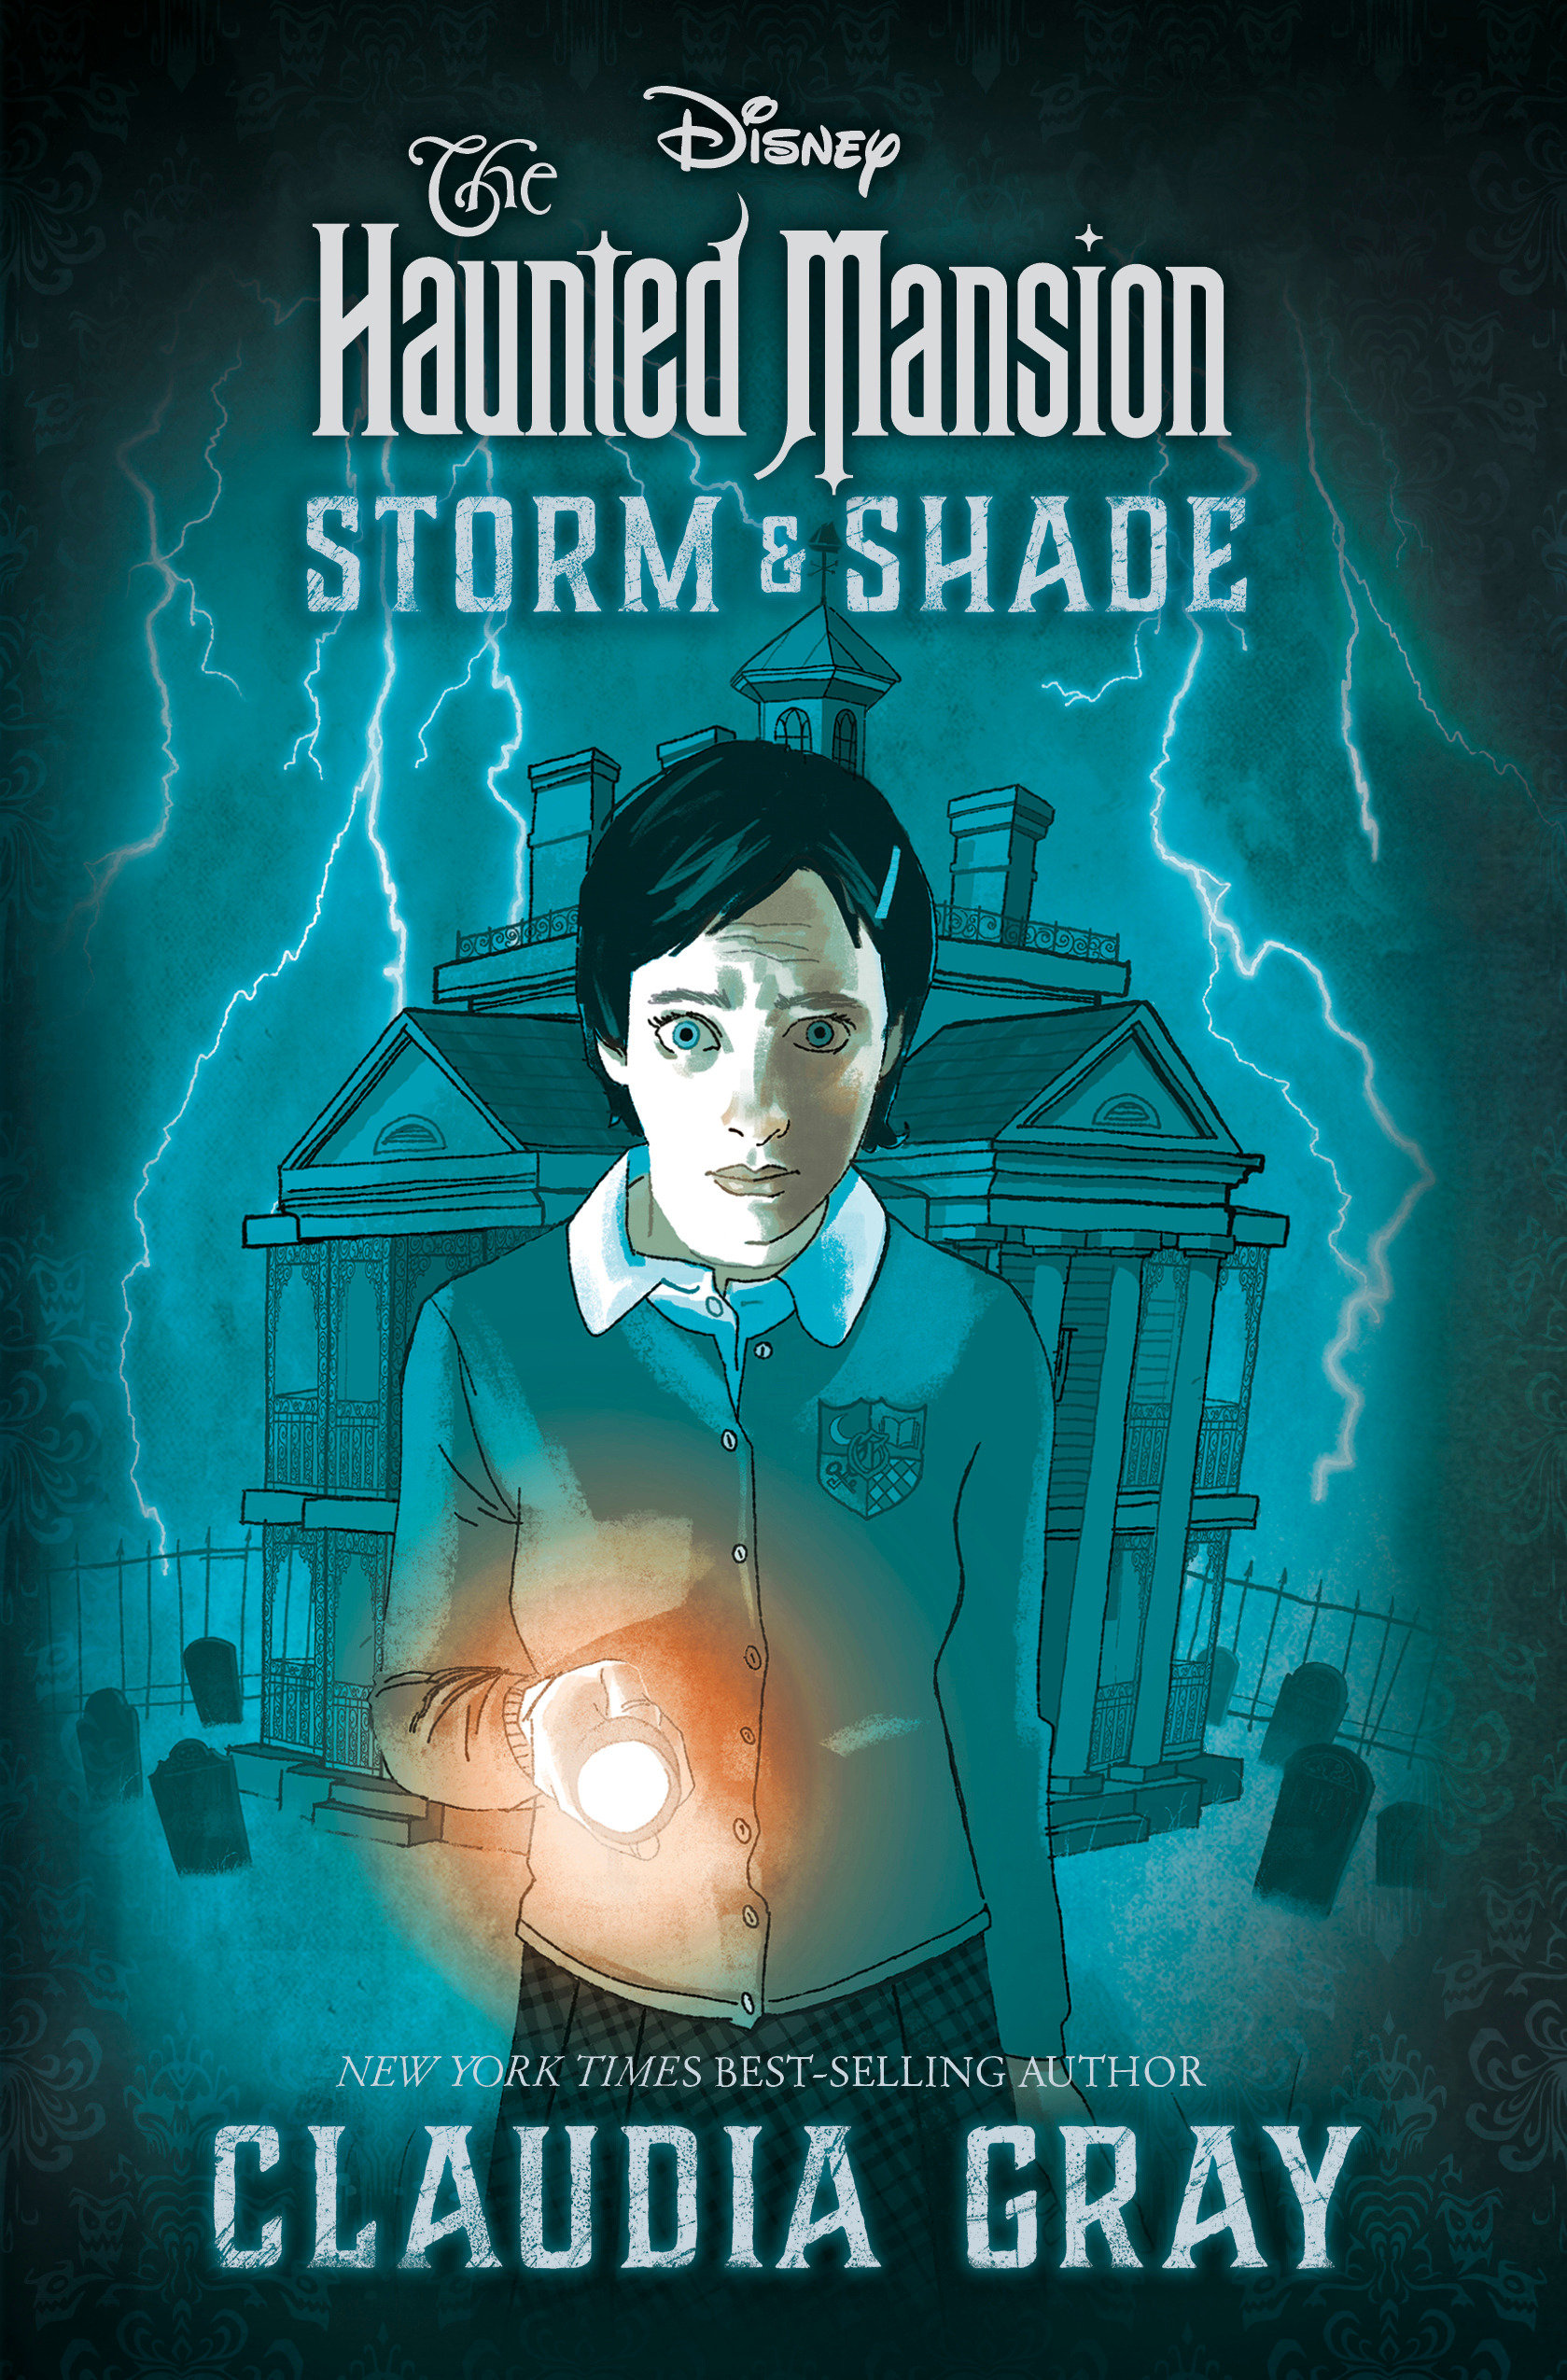 The Haunted Mansion Storm & Shade Hardcover Book